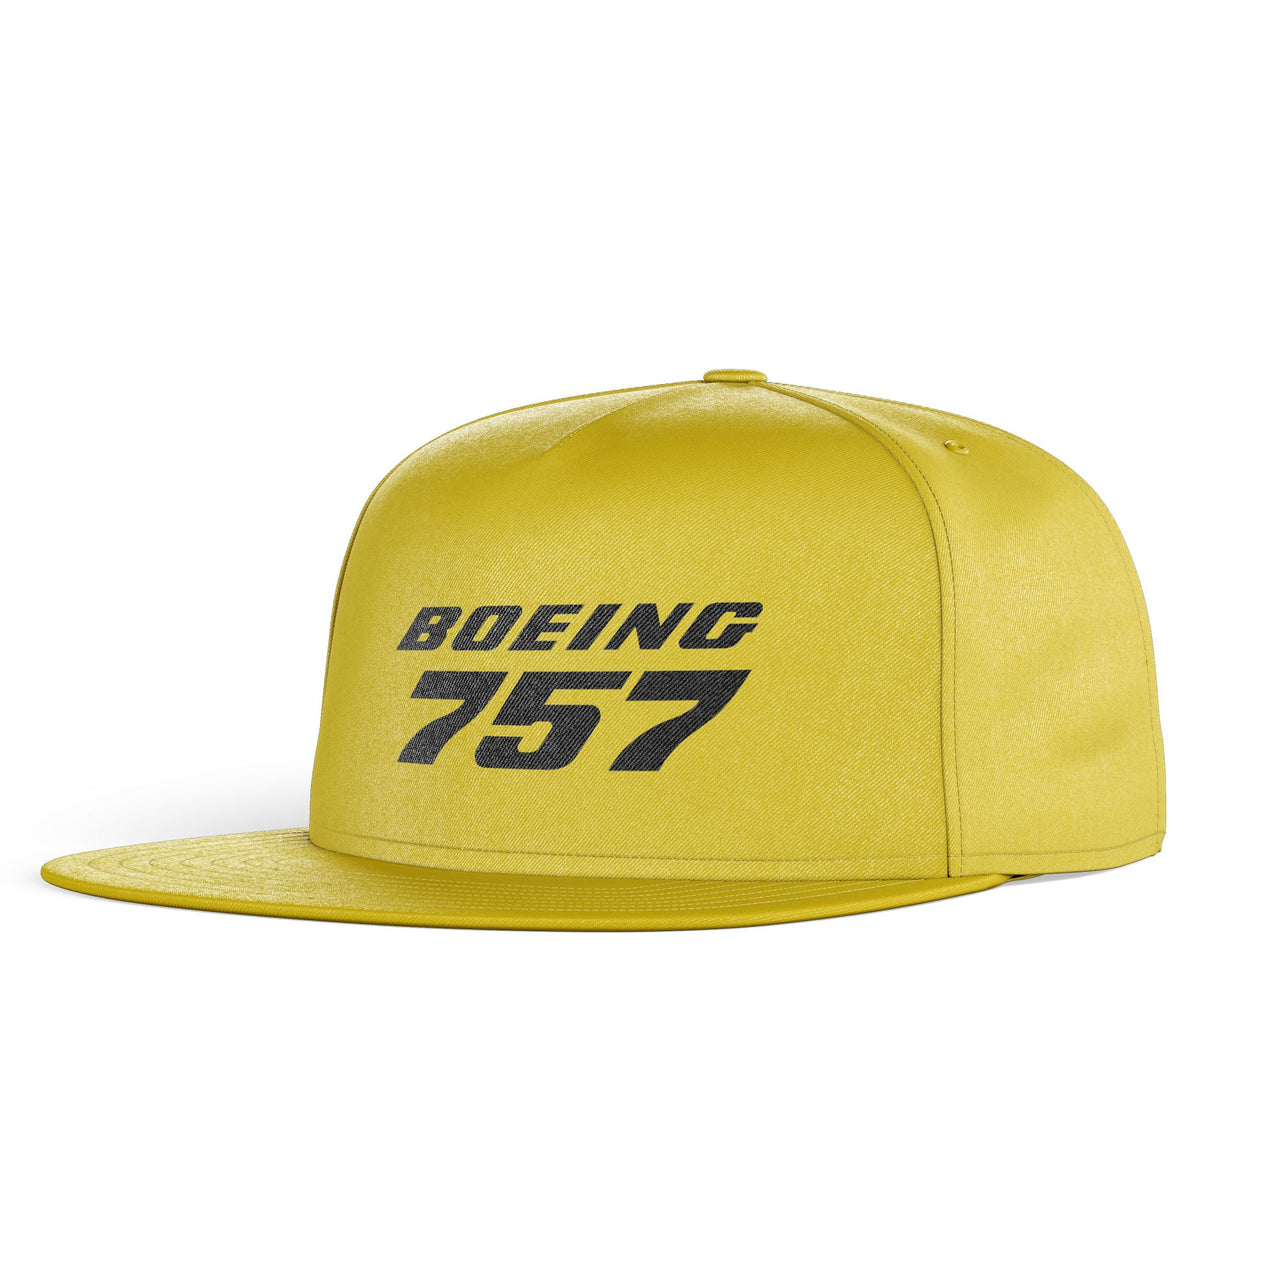 Boeing 757 & Text Designed Snapback Caps & Hats